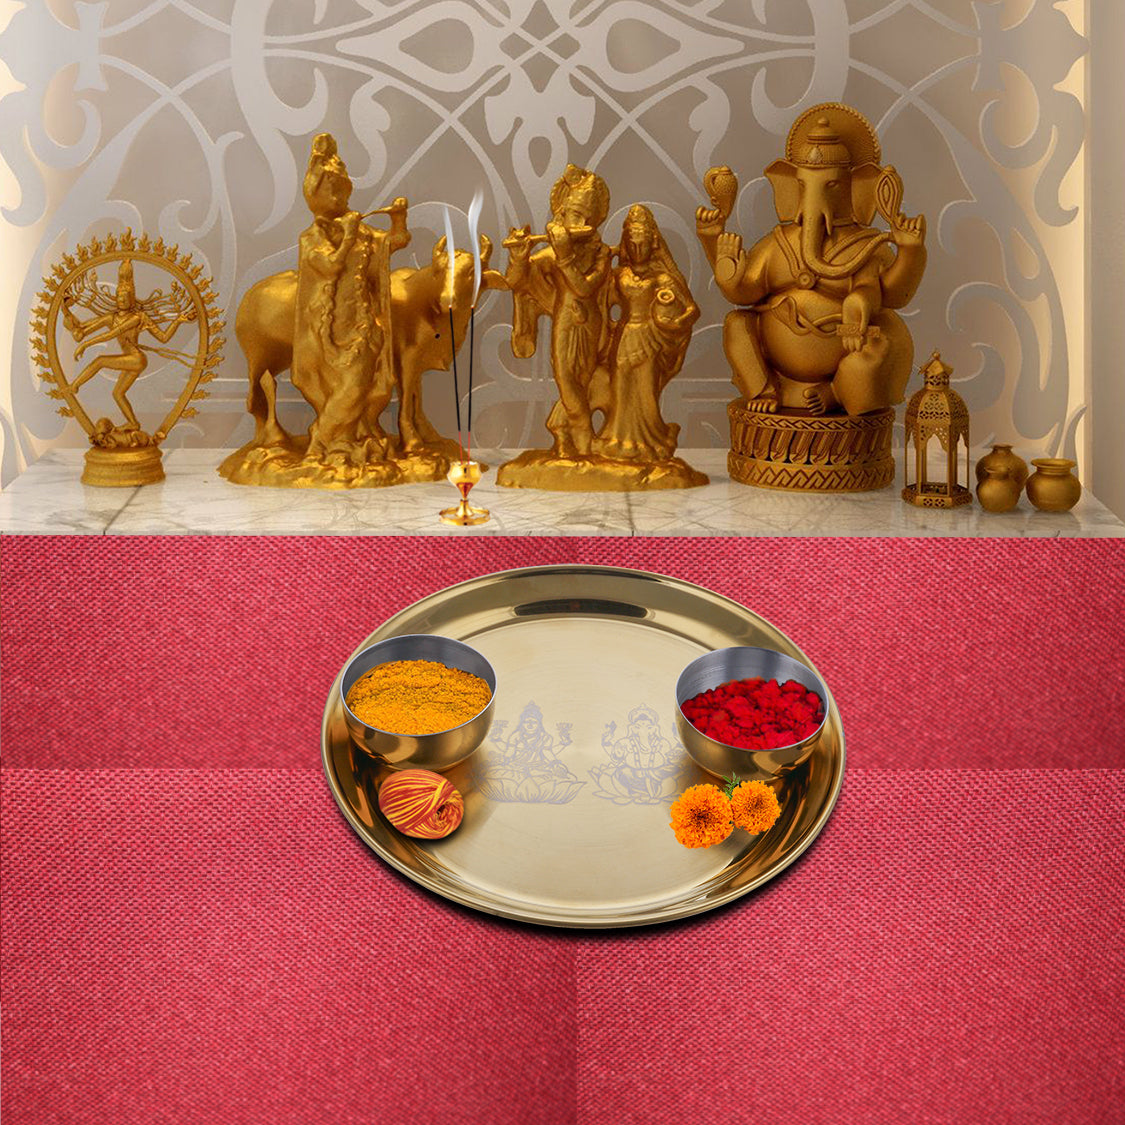 Stainless Steel Pooja Thali Set with Gold PVD Coating Lakshmi & Ganesh